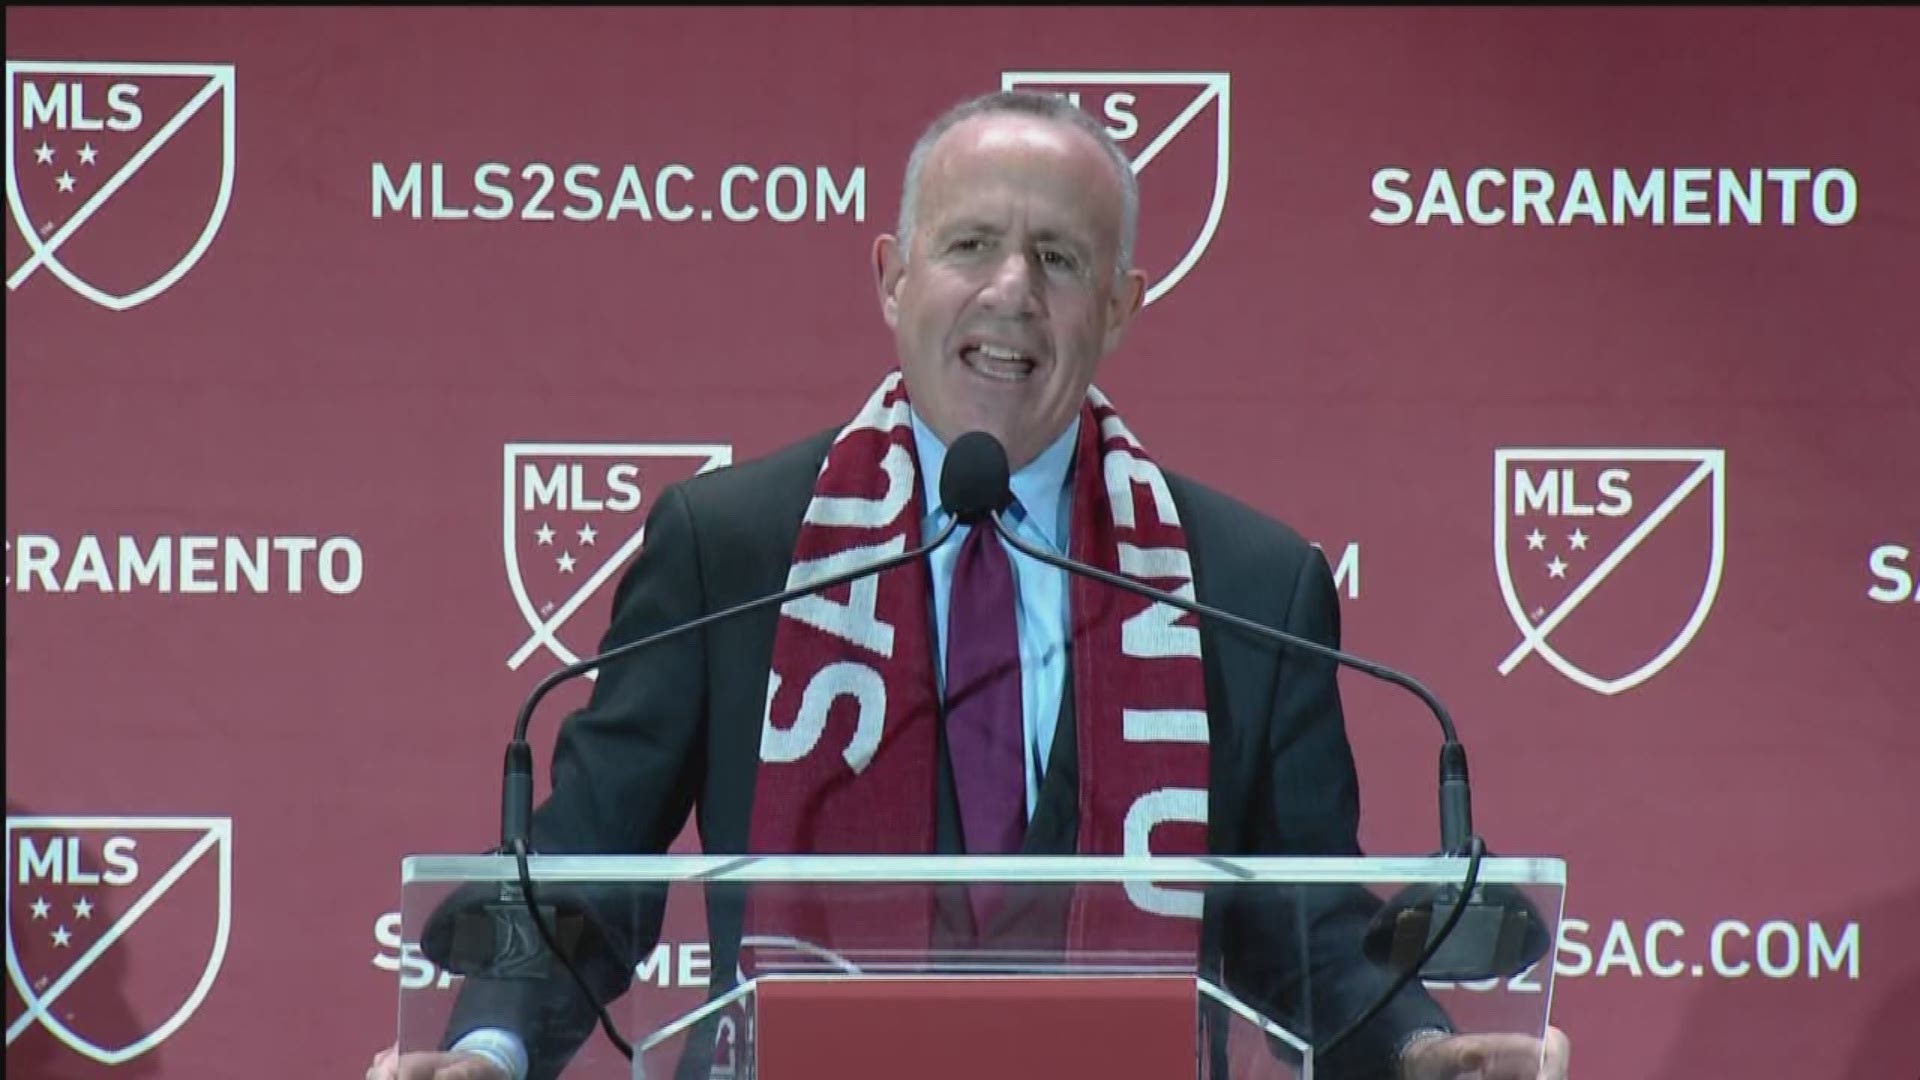 Darrell Steinberg, Mayor of Sacramento, says the city is now a major league city in every way, with sports being just a part of it.